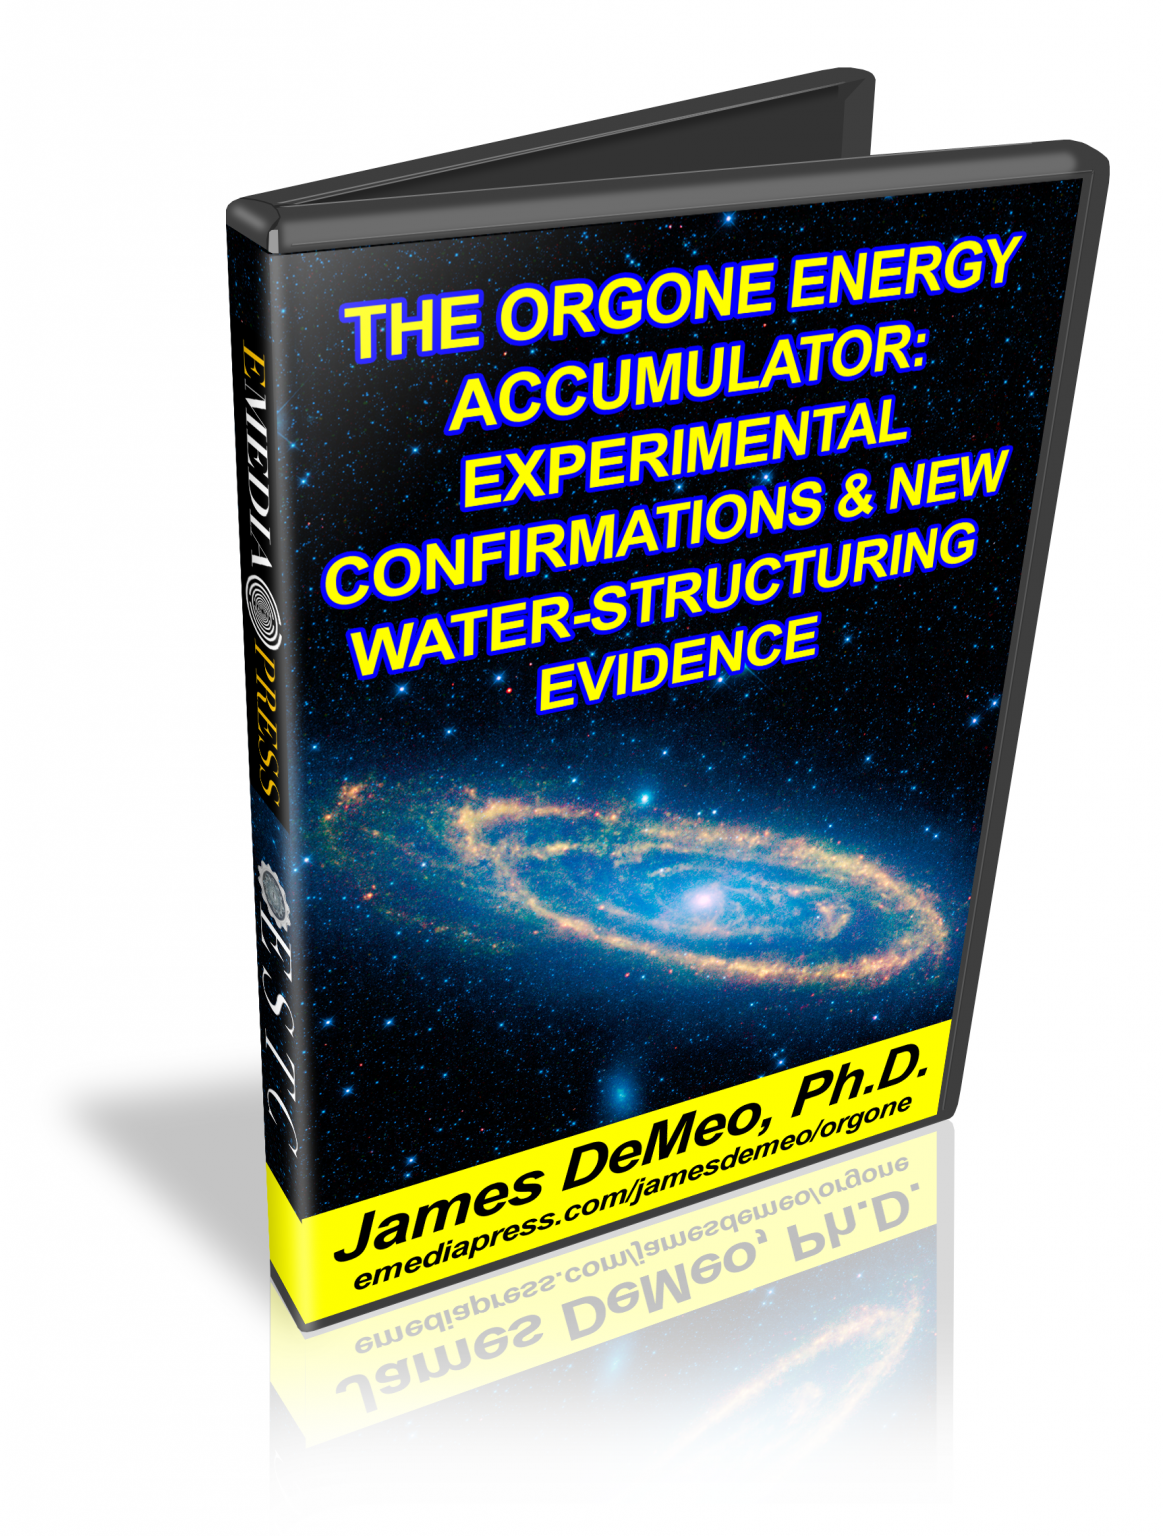 Orgone Energy Accumulator - Experimental Confirmations & New Water-Structuring Evidence